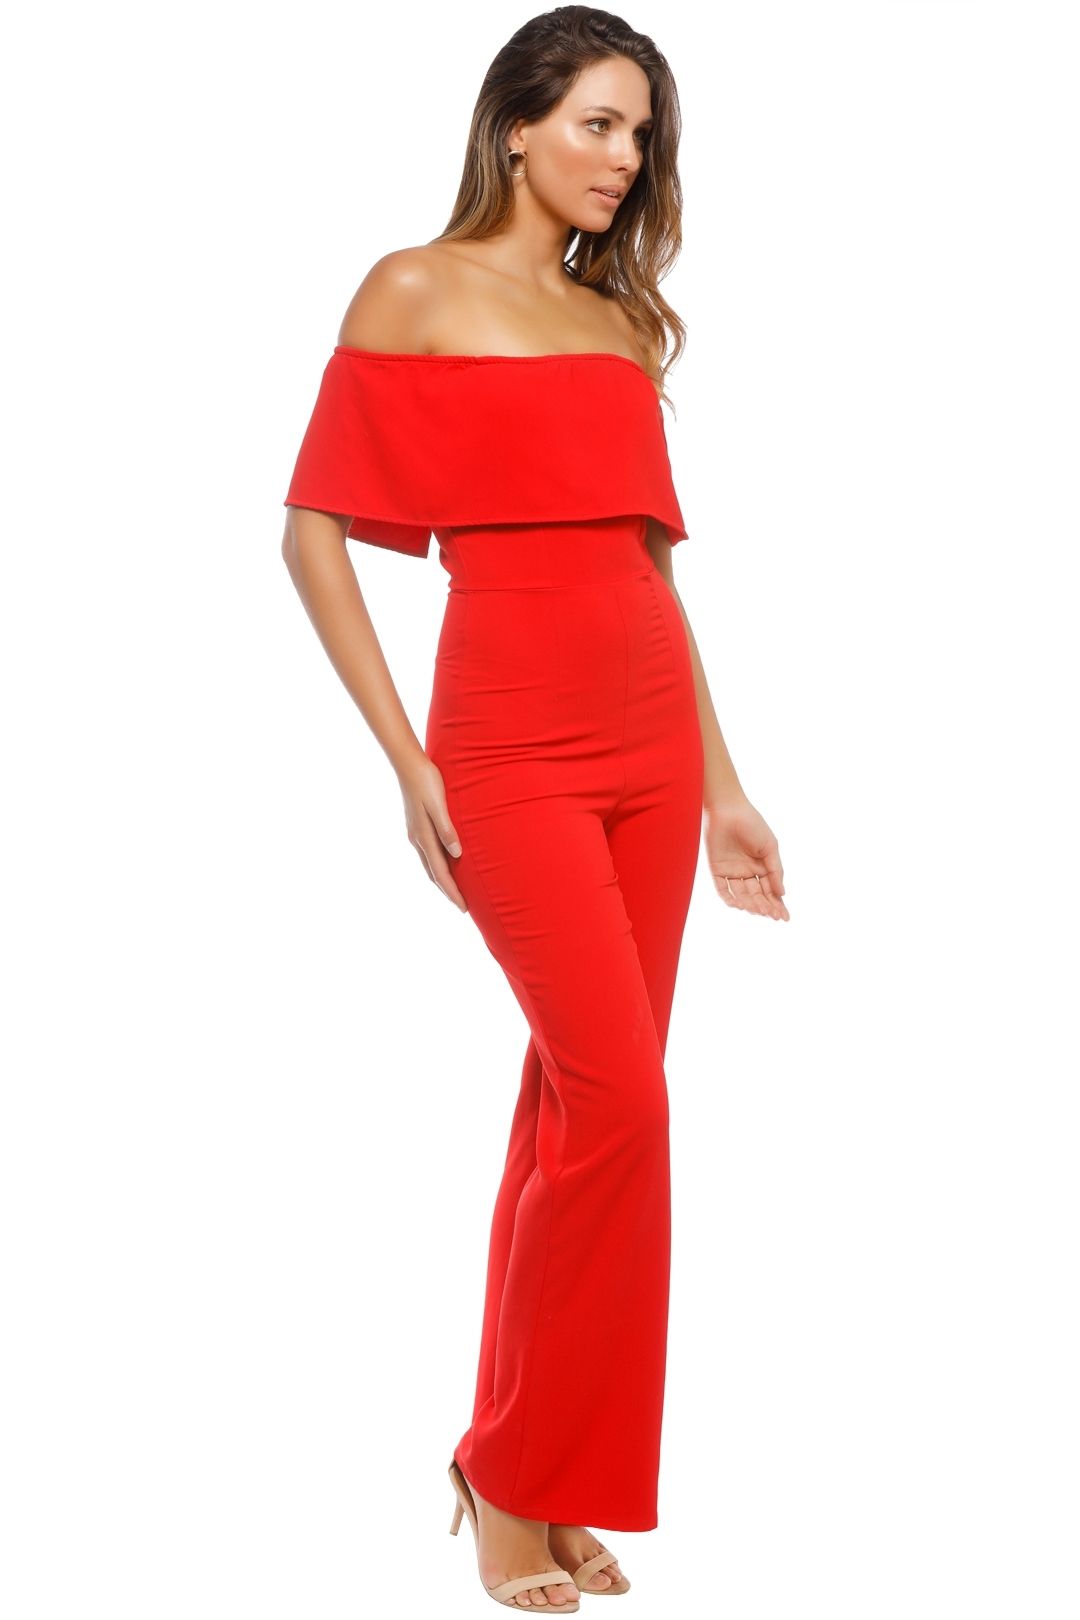 Mossman - The Blank Stare Jumpsuit - Red - Side